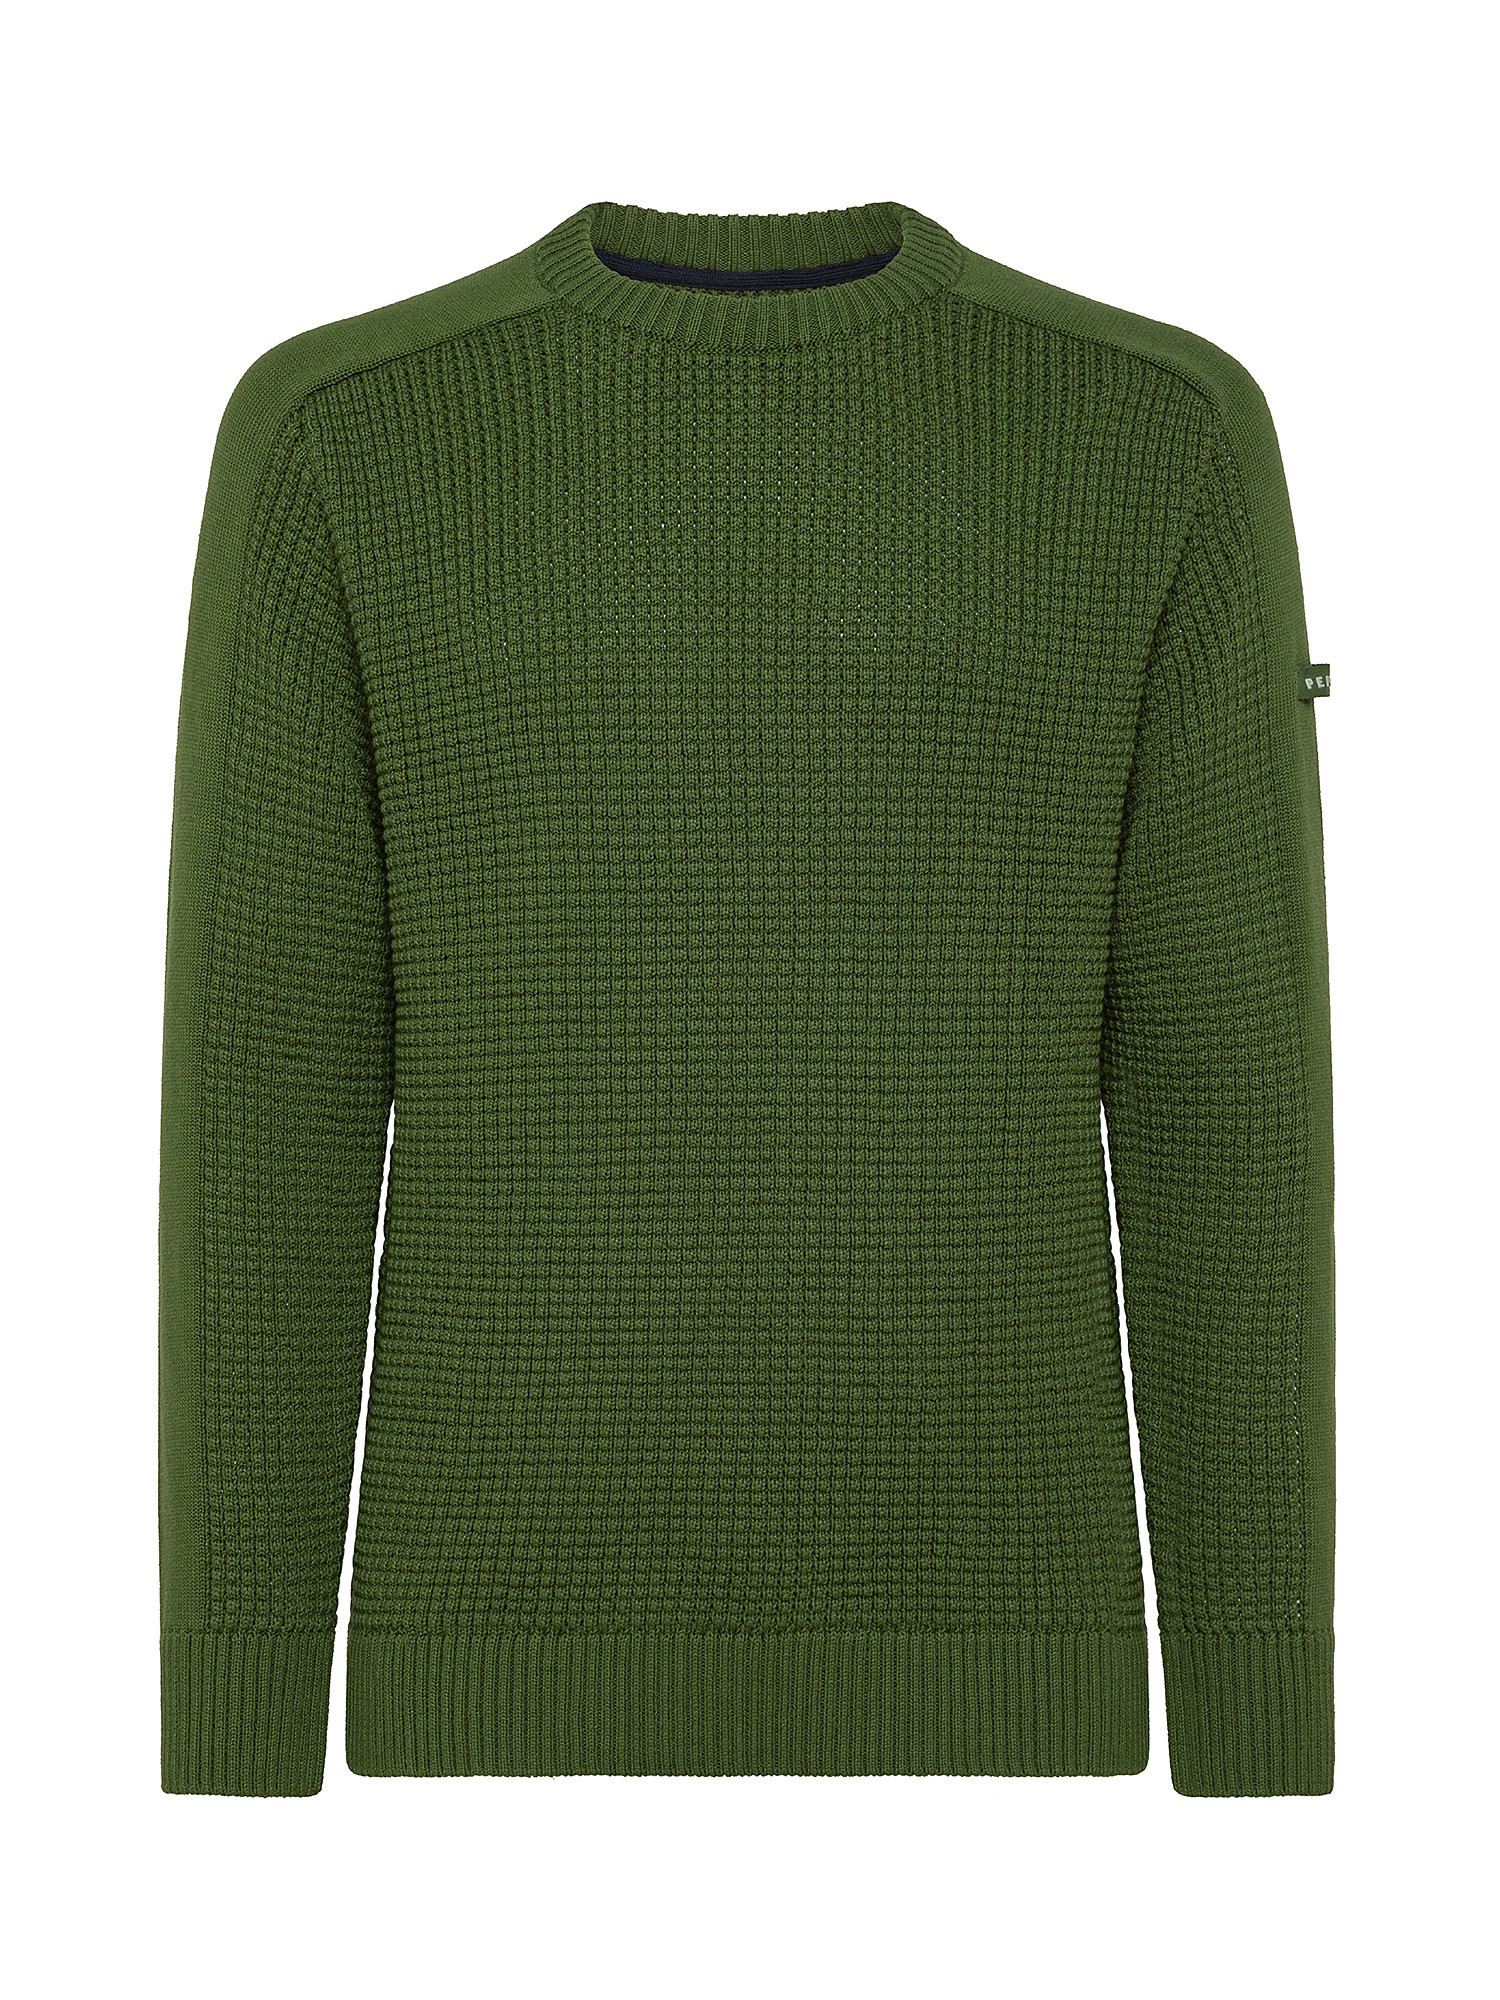 Moises contrast pullover, Dark Green, large image number 0